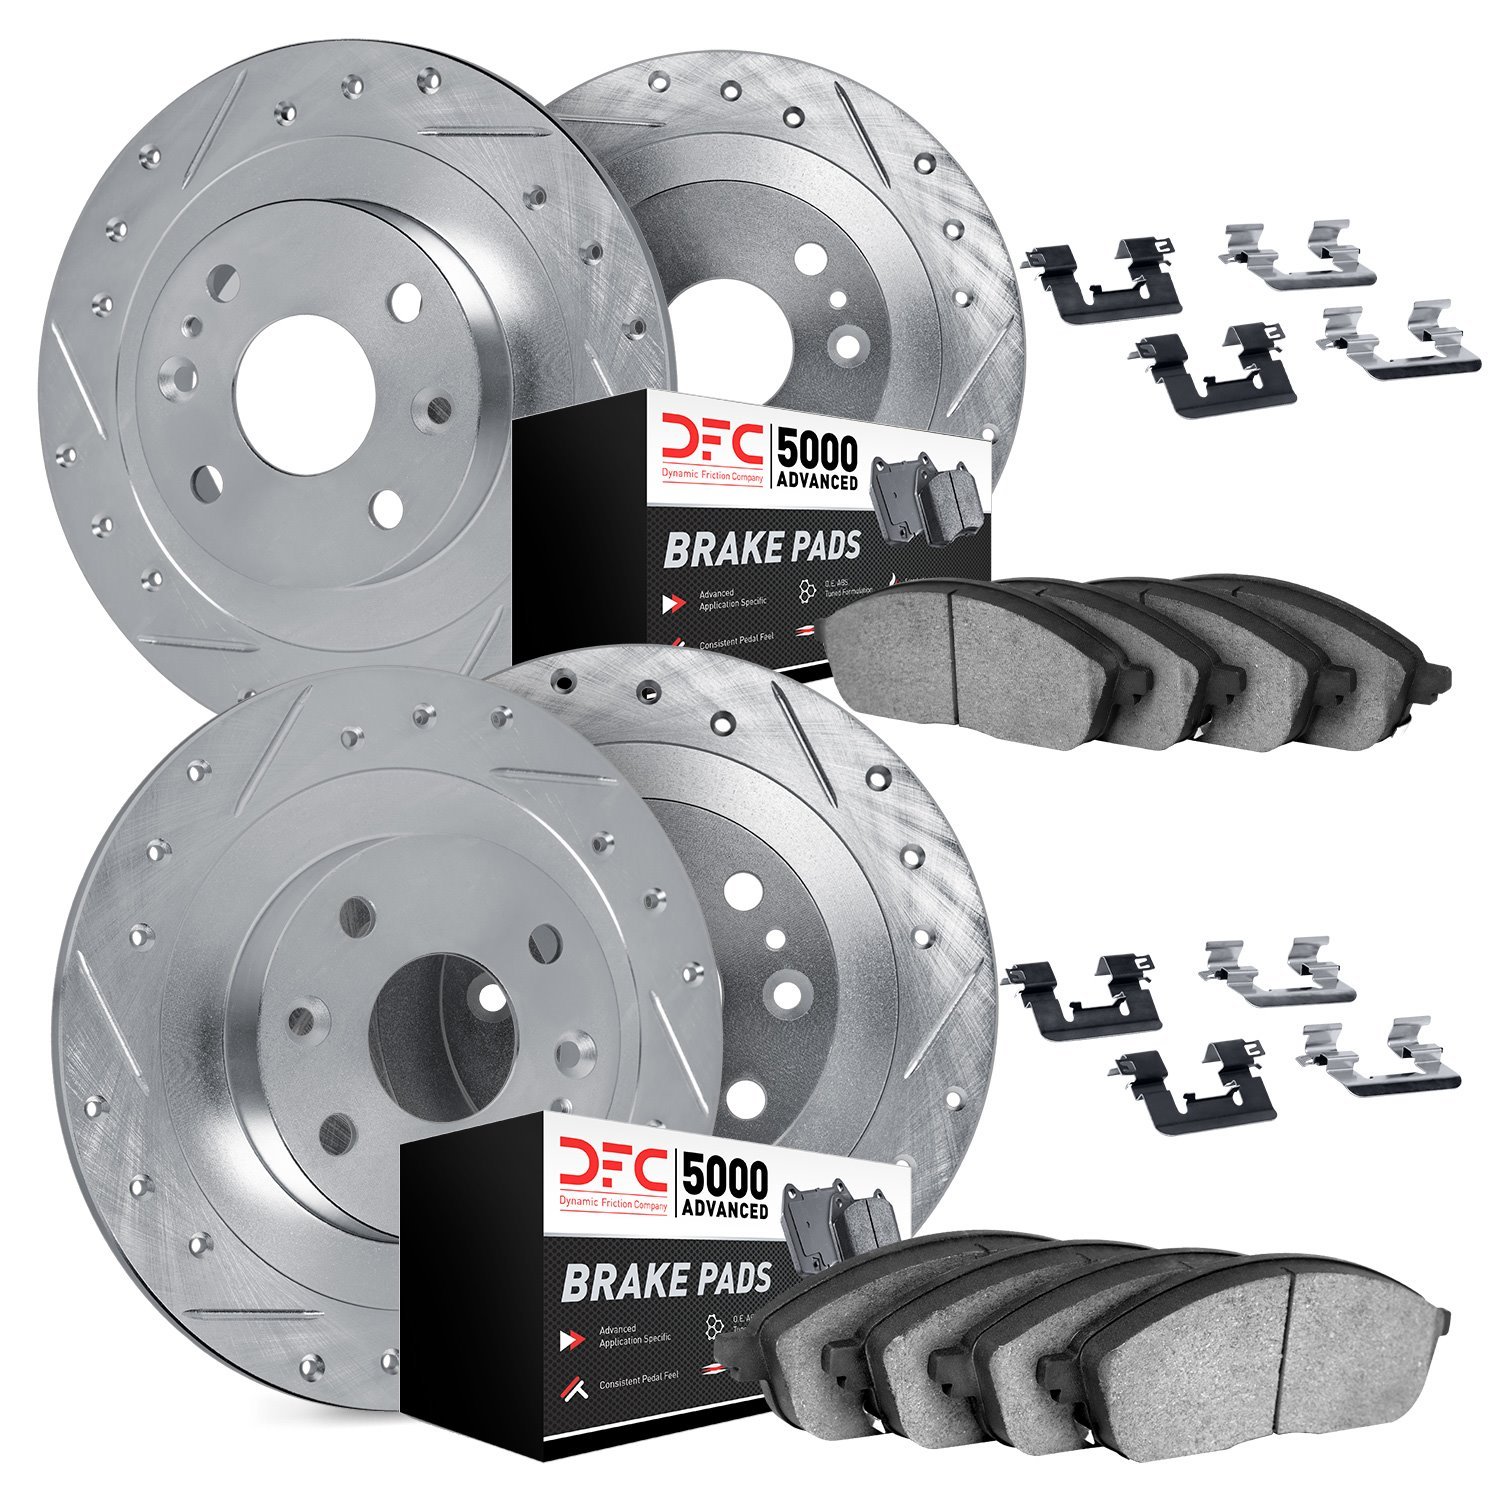 7514-43011 Drilled/Slotted Brake Rotors w/5000 Advanced Brake Pads Kit & Hardware [Silver], 1976-1980 Mopar, Position: Front and